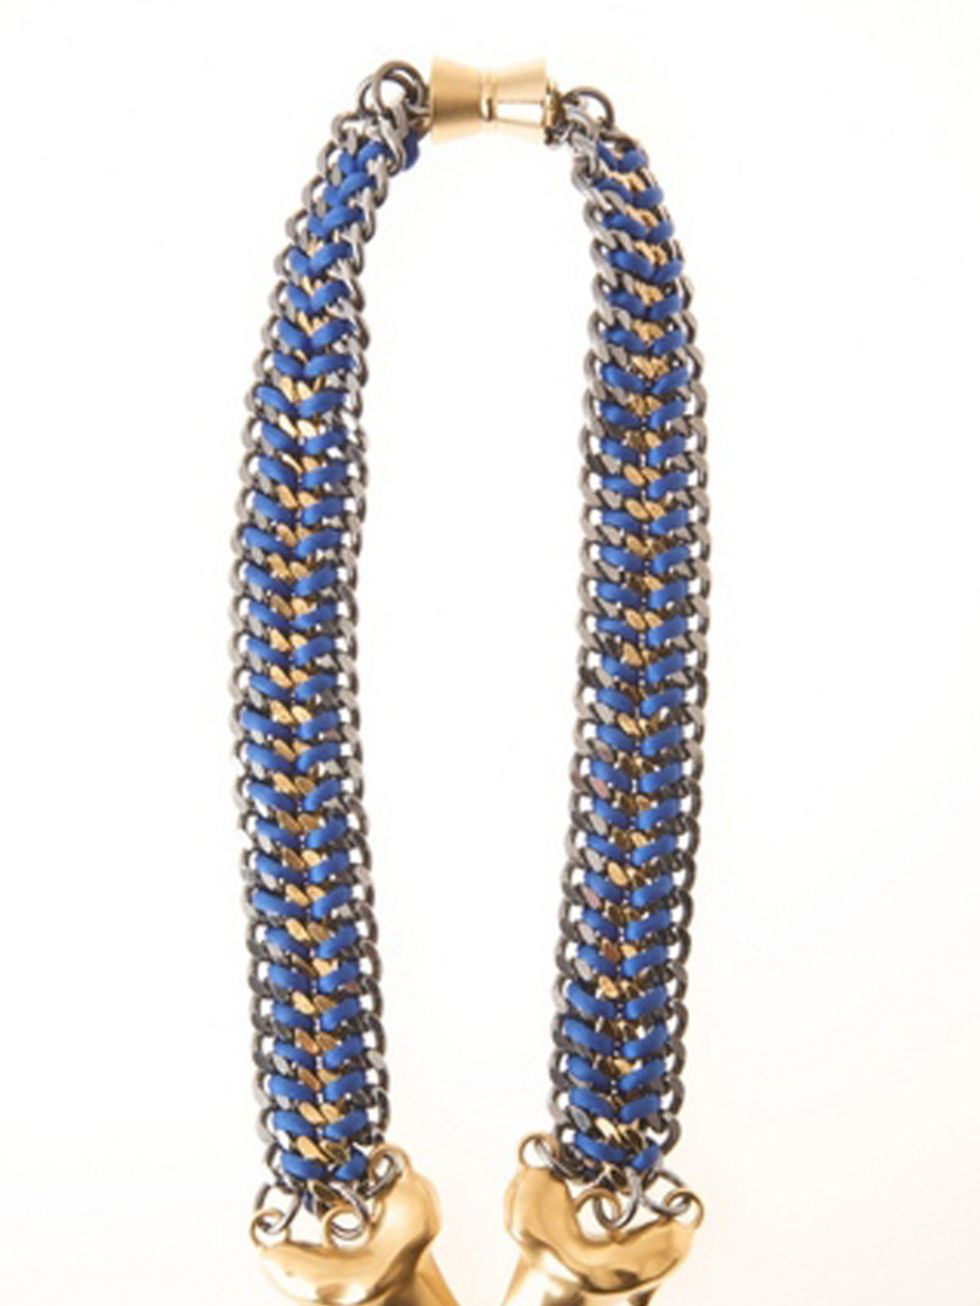 <p>Blue and gold chain necklace, £486, by <a href="http://bexrox.myshopify.com/products/exclusive-double-shark-necklace">Bex Rox</a></p>